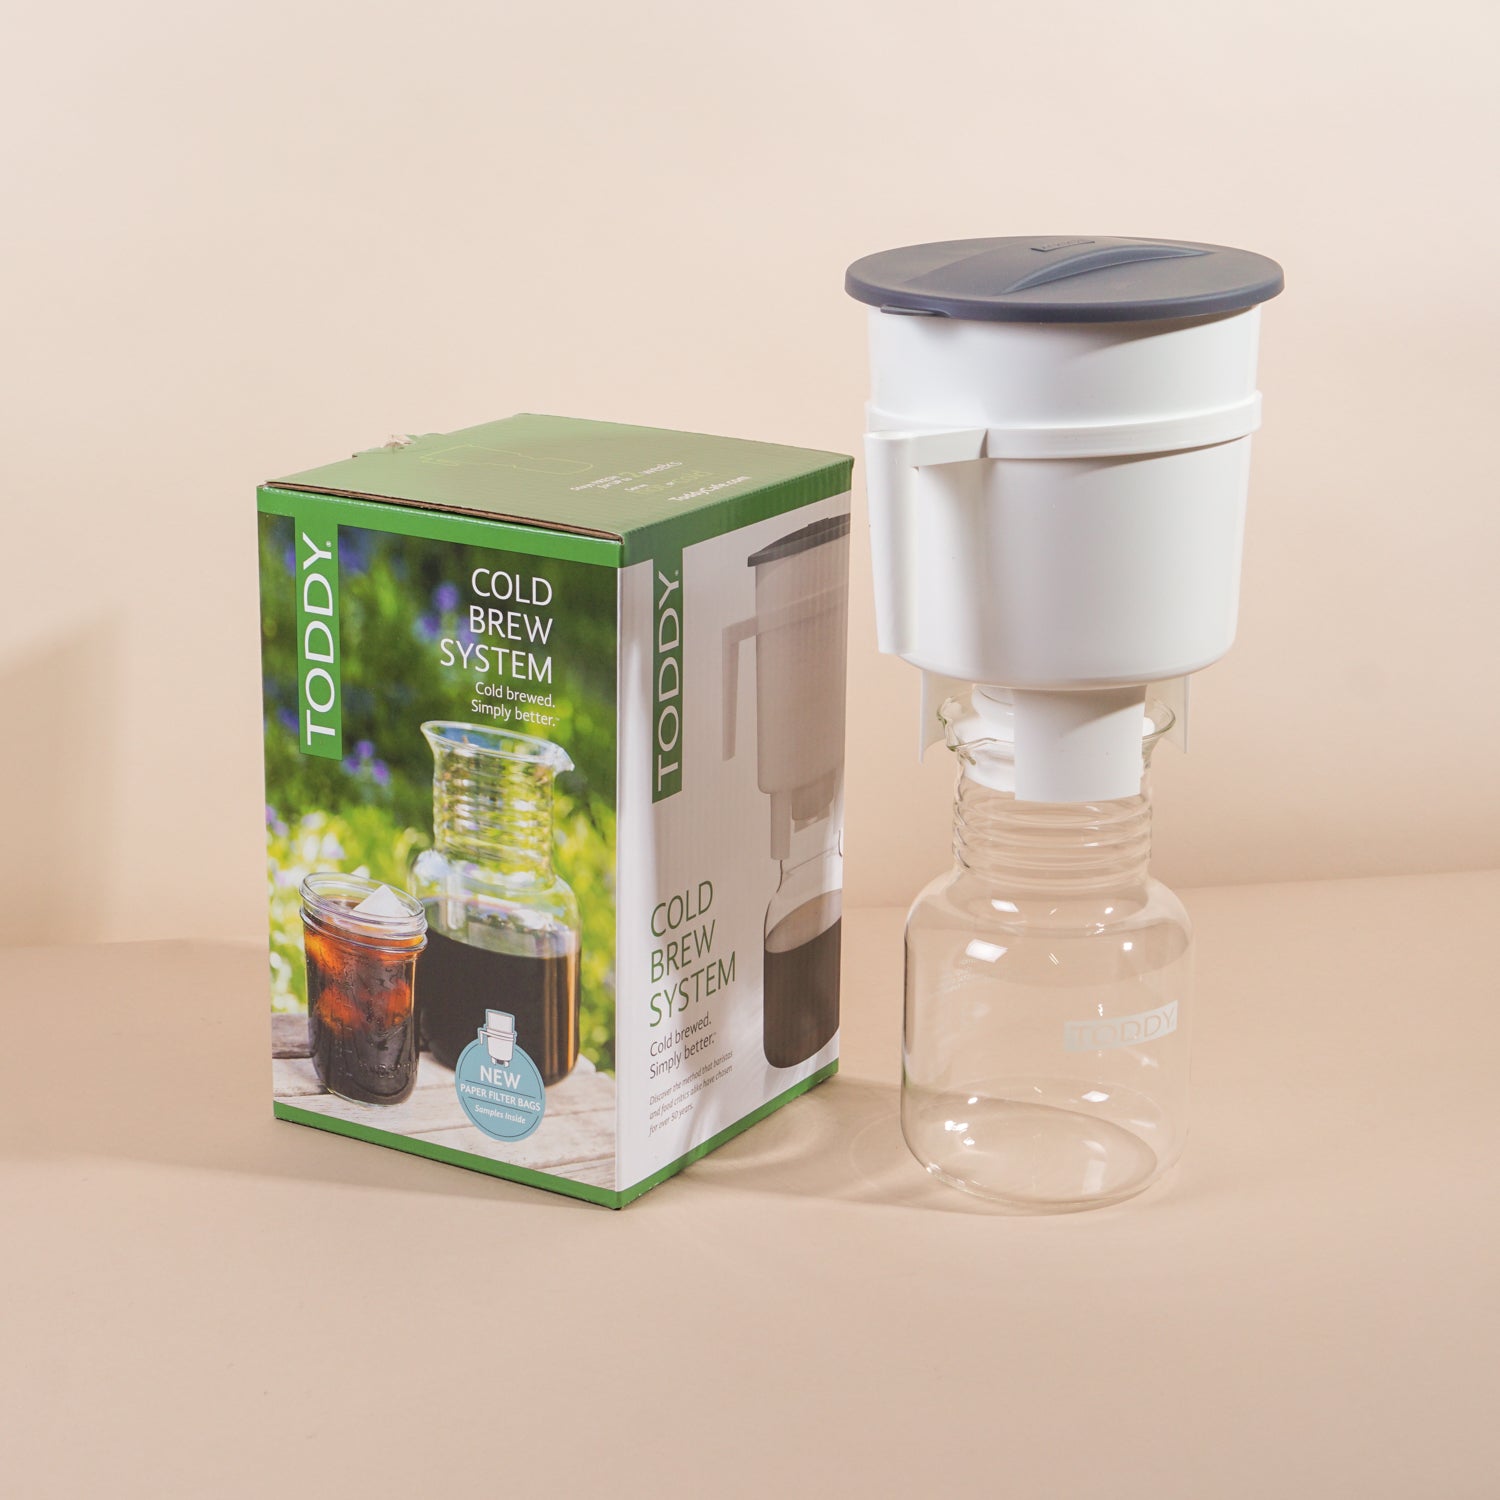 Toddy Cold Brew System – Mill Coffee & Tea